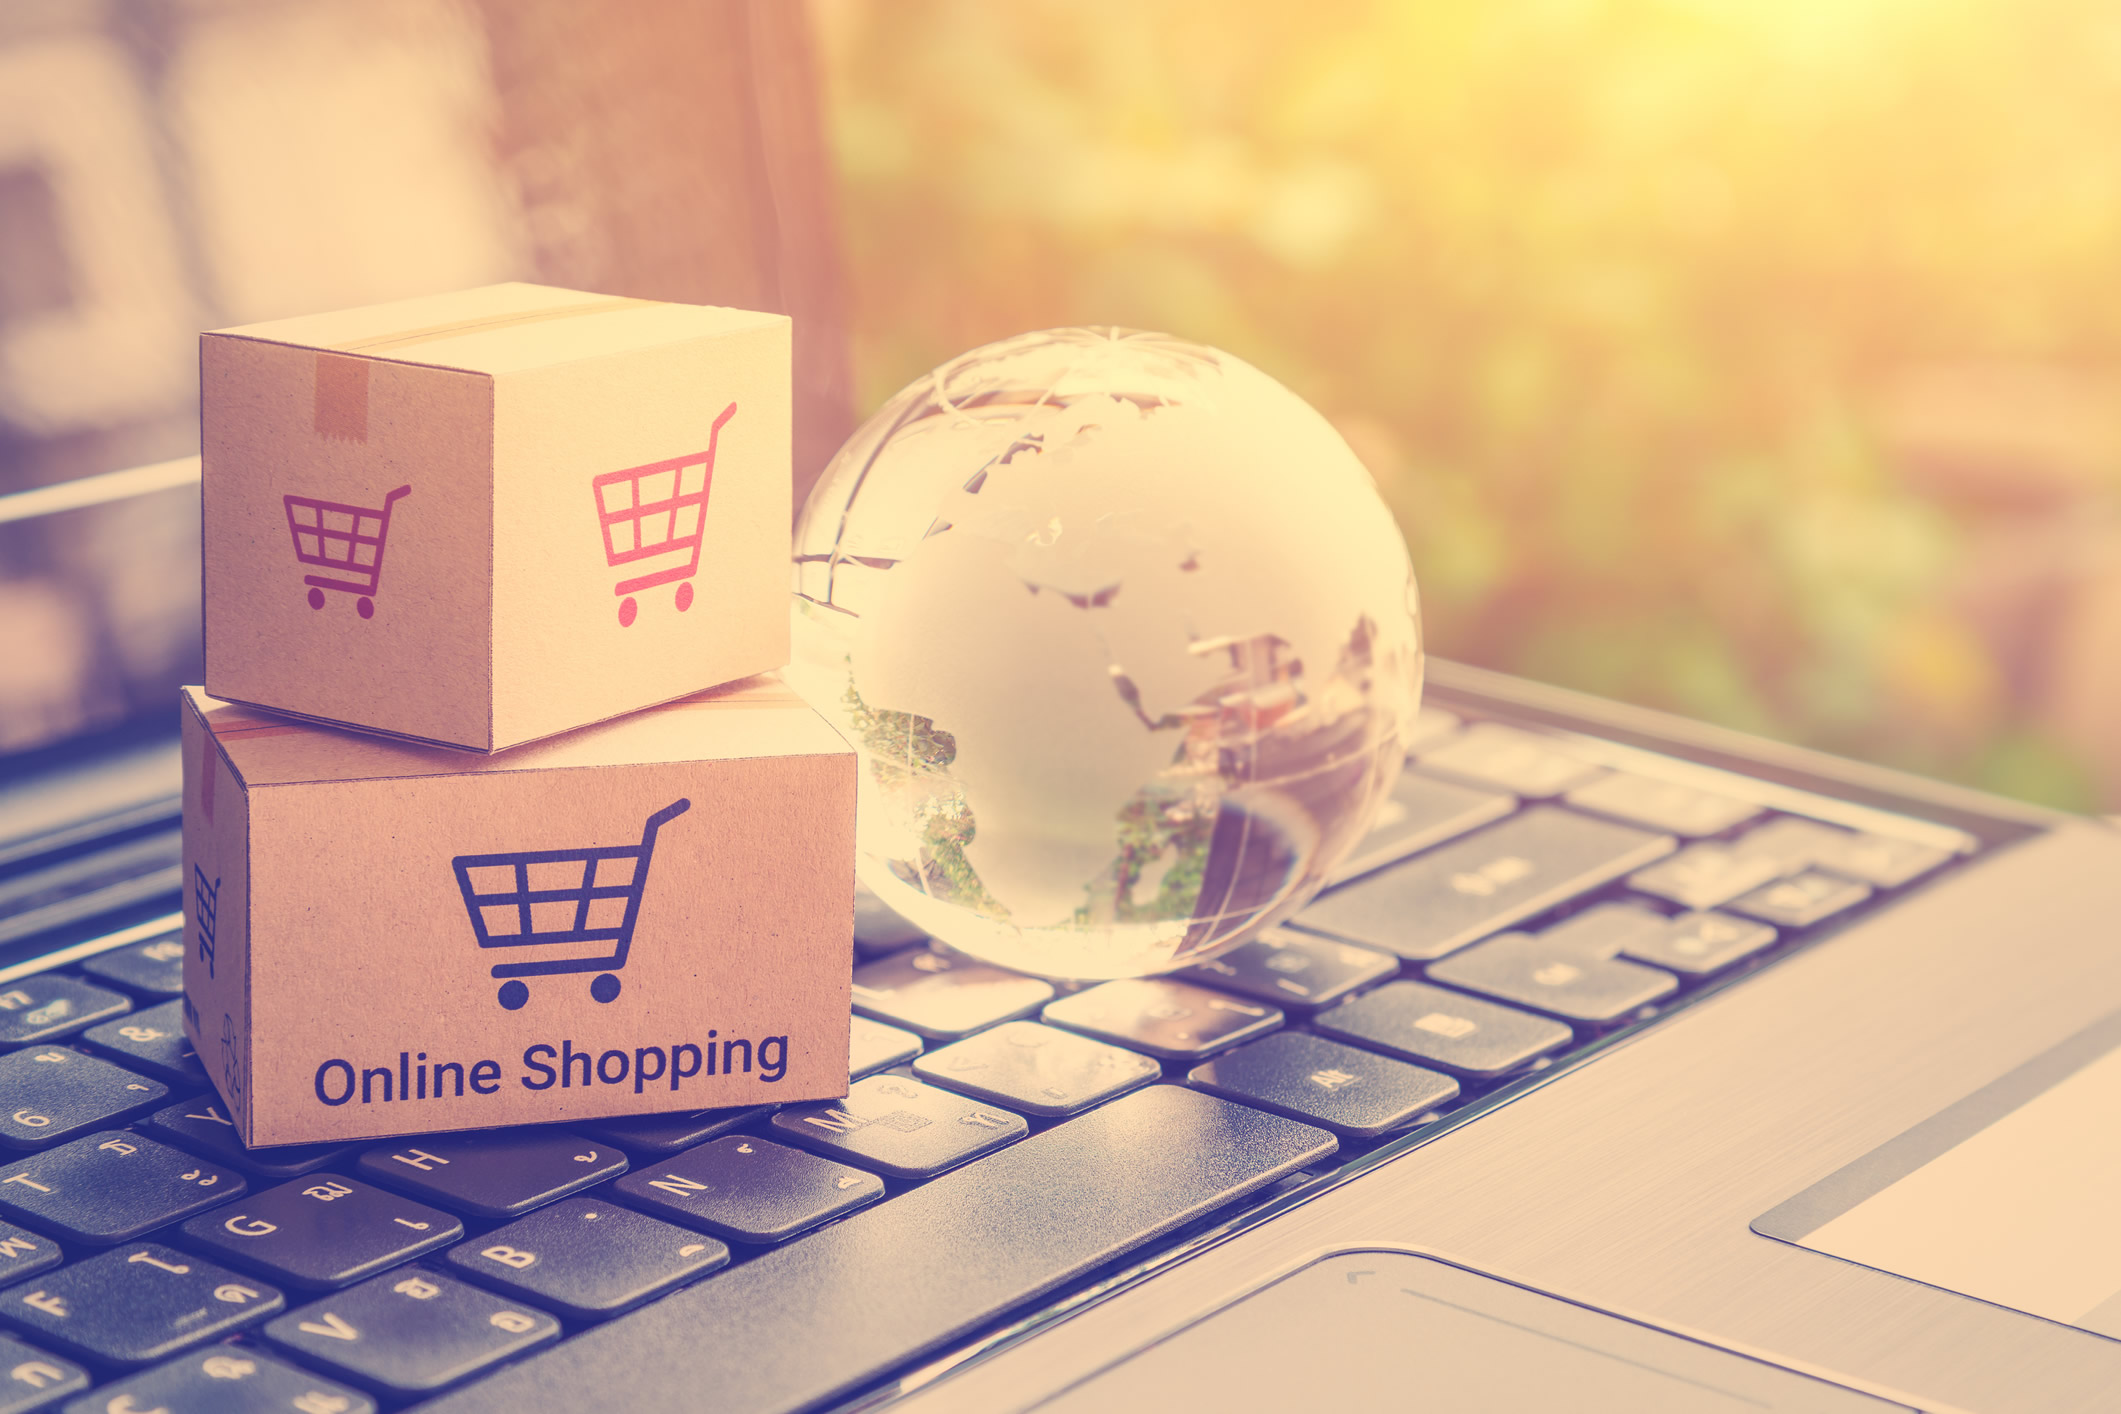 Important ways 3PL is easing e-commerce fulfillment headaches